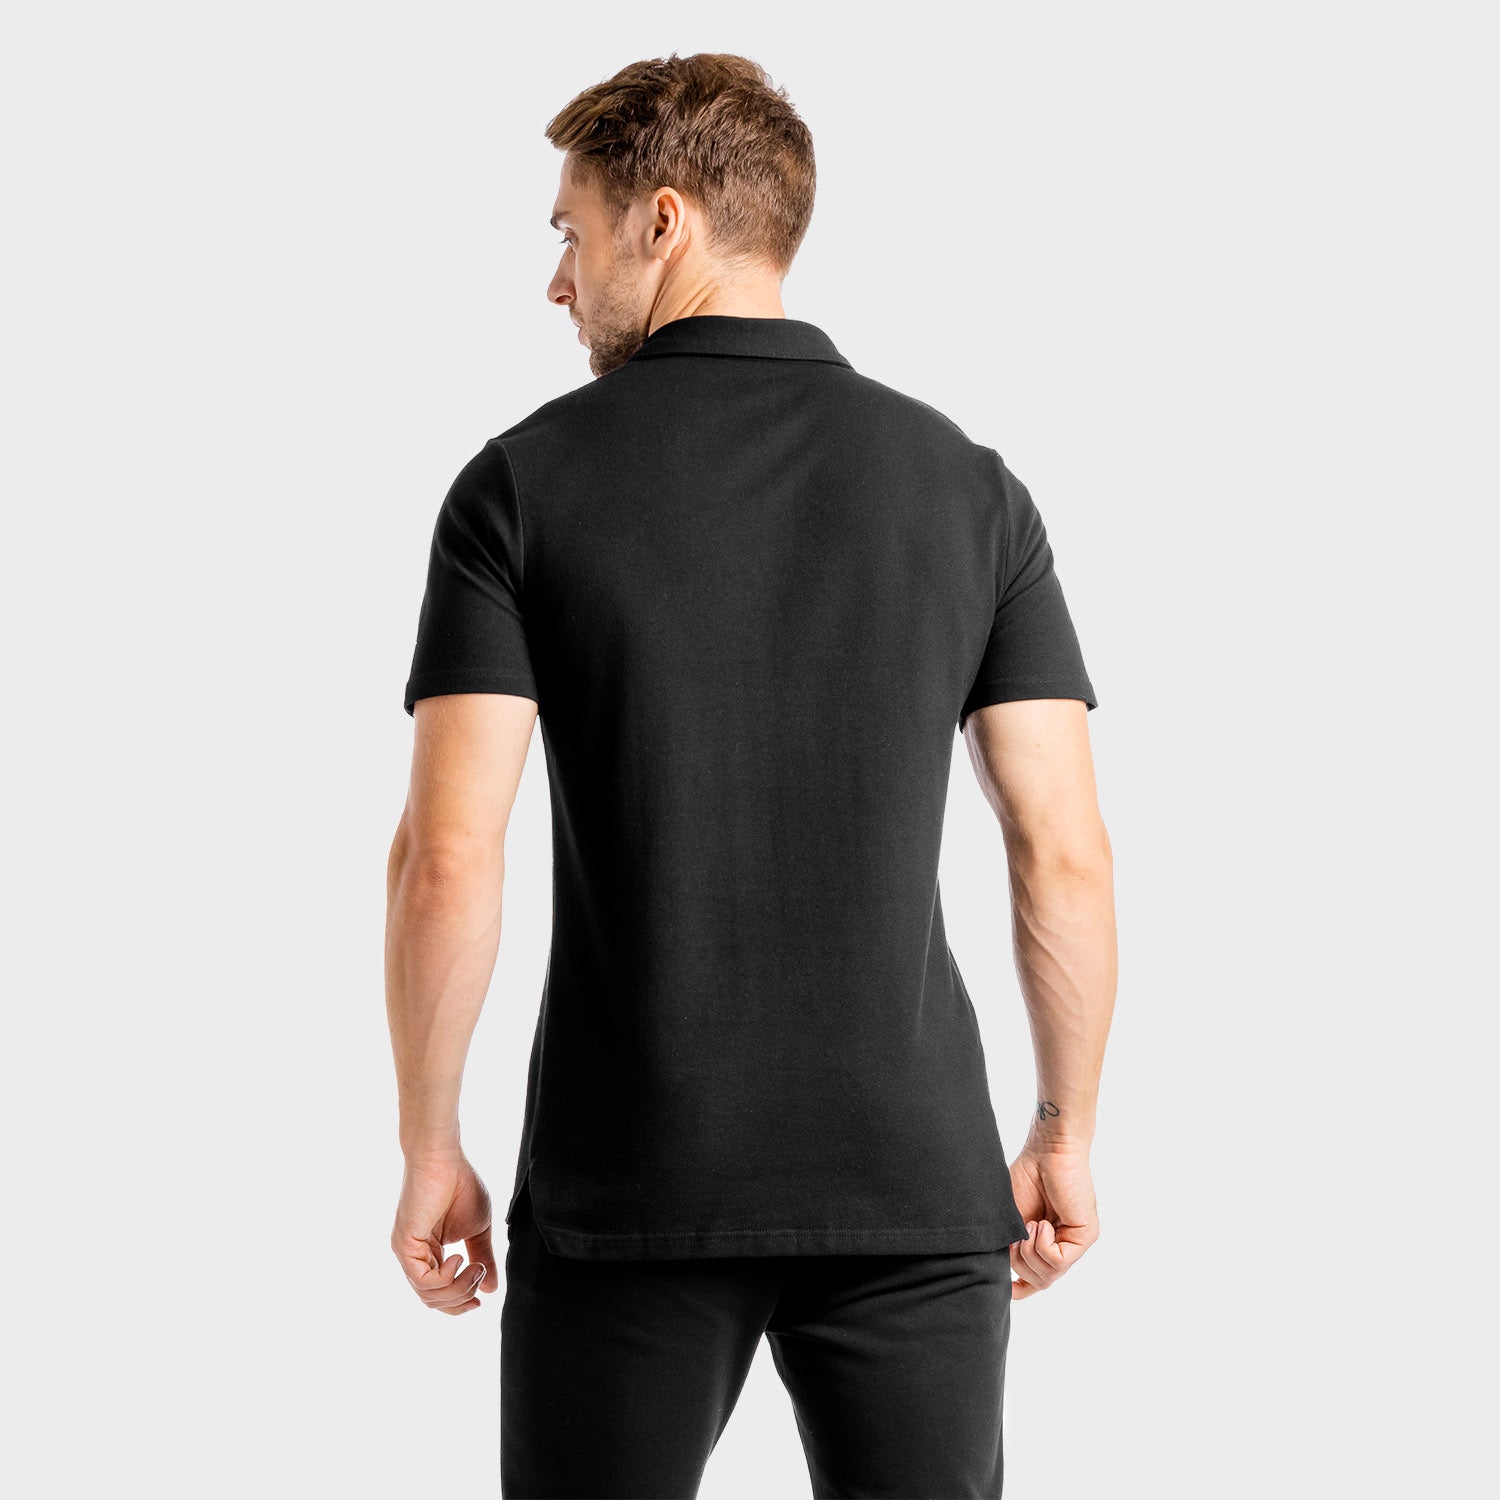 squatwolf-gym-wear-core-tee-polo-black-workout-shirts-for-men